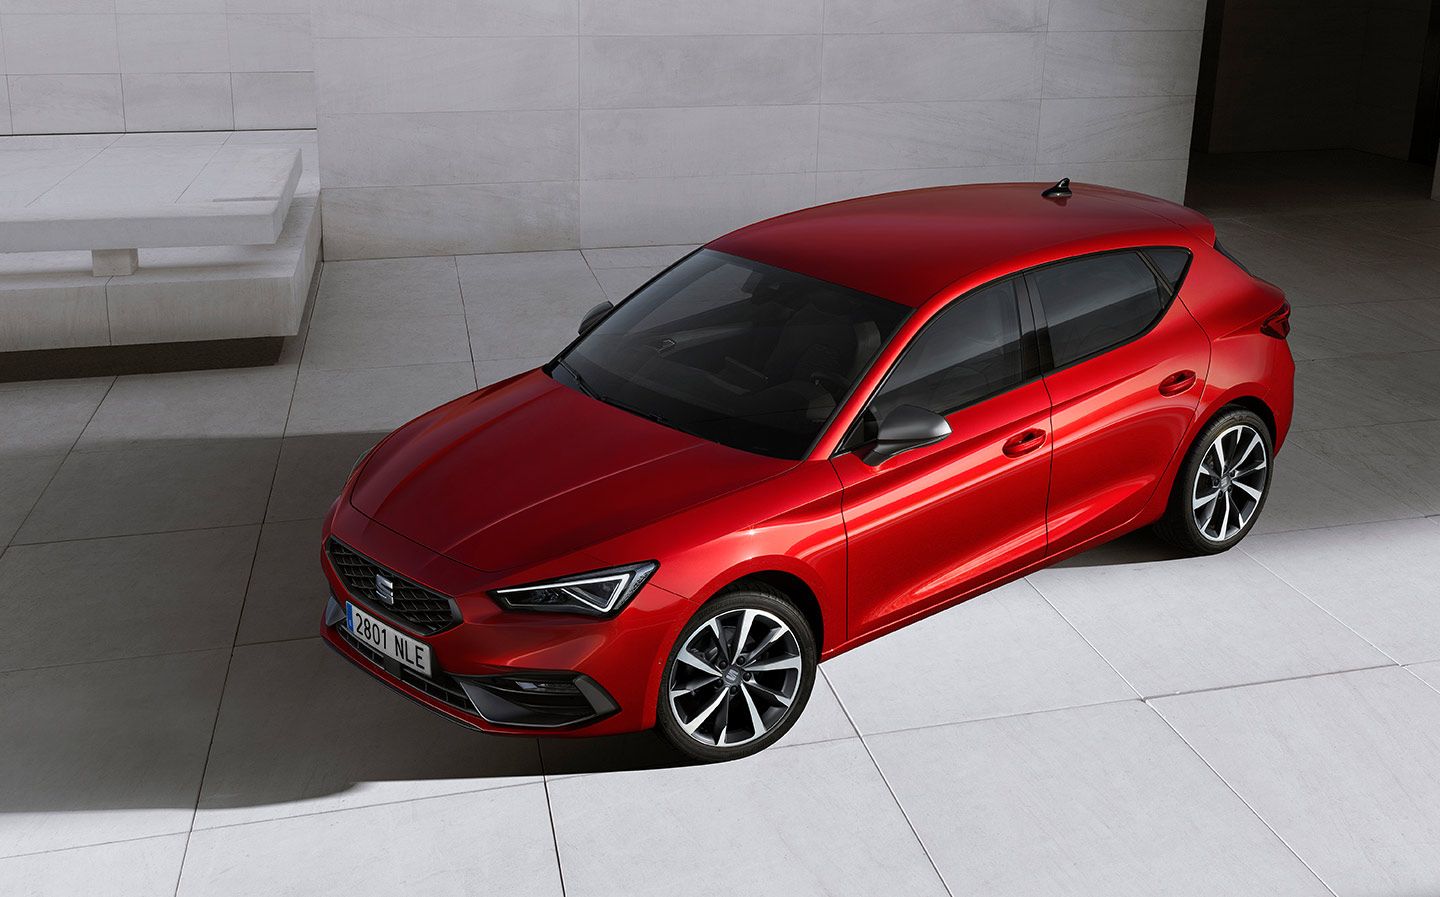 SEAT Leon: engines, tech, price, image and UK on sale date